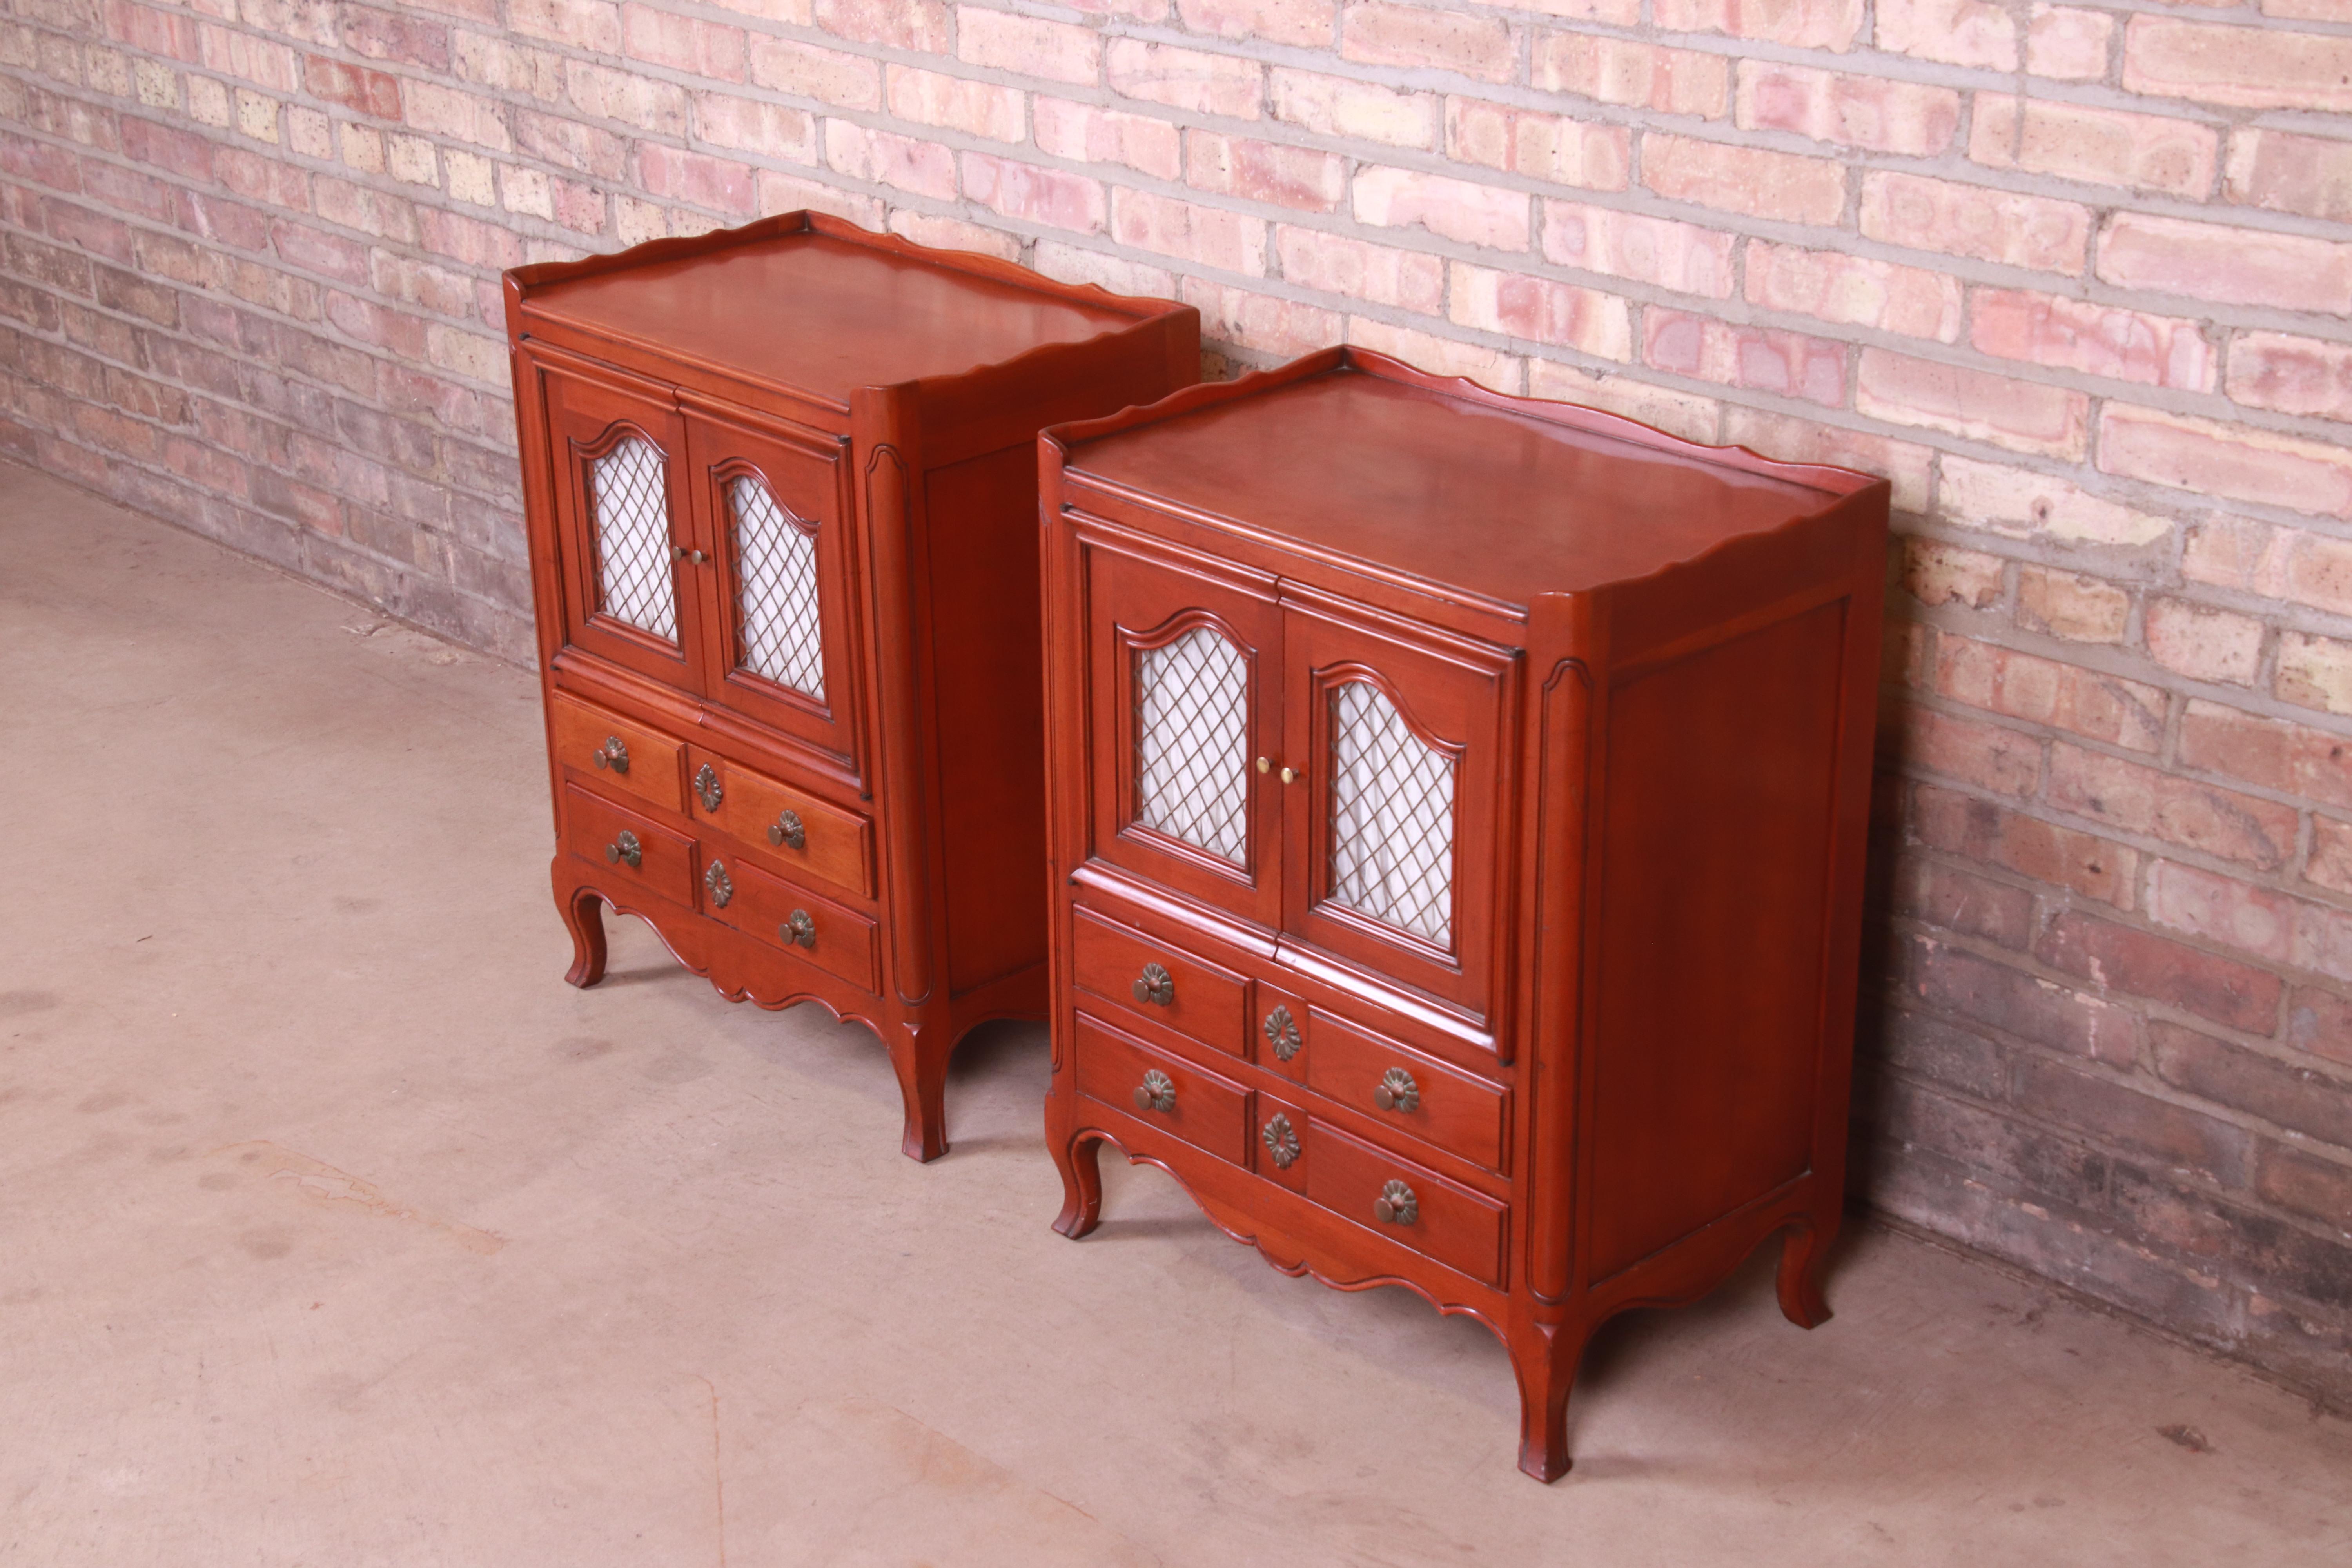 20th Century John Widdicomb French Provincial Louis XV Cherry Wood Nightstands, Circa 1940s For Sale